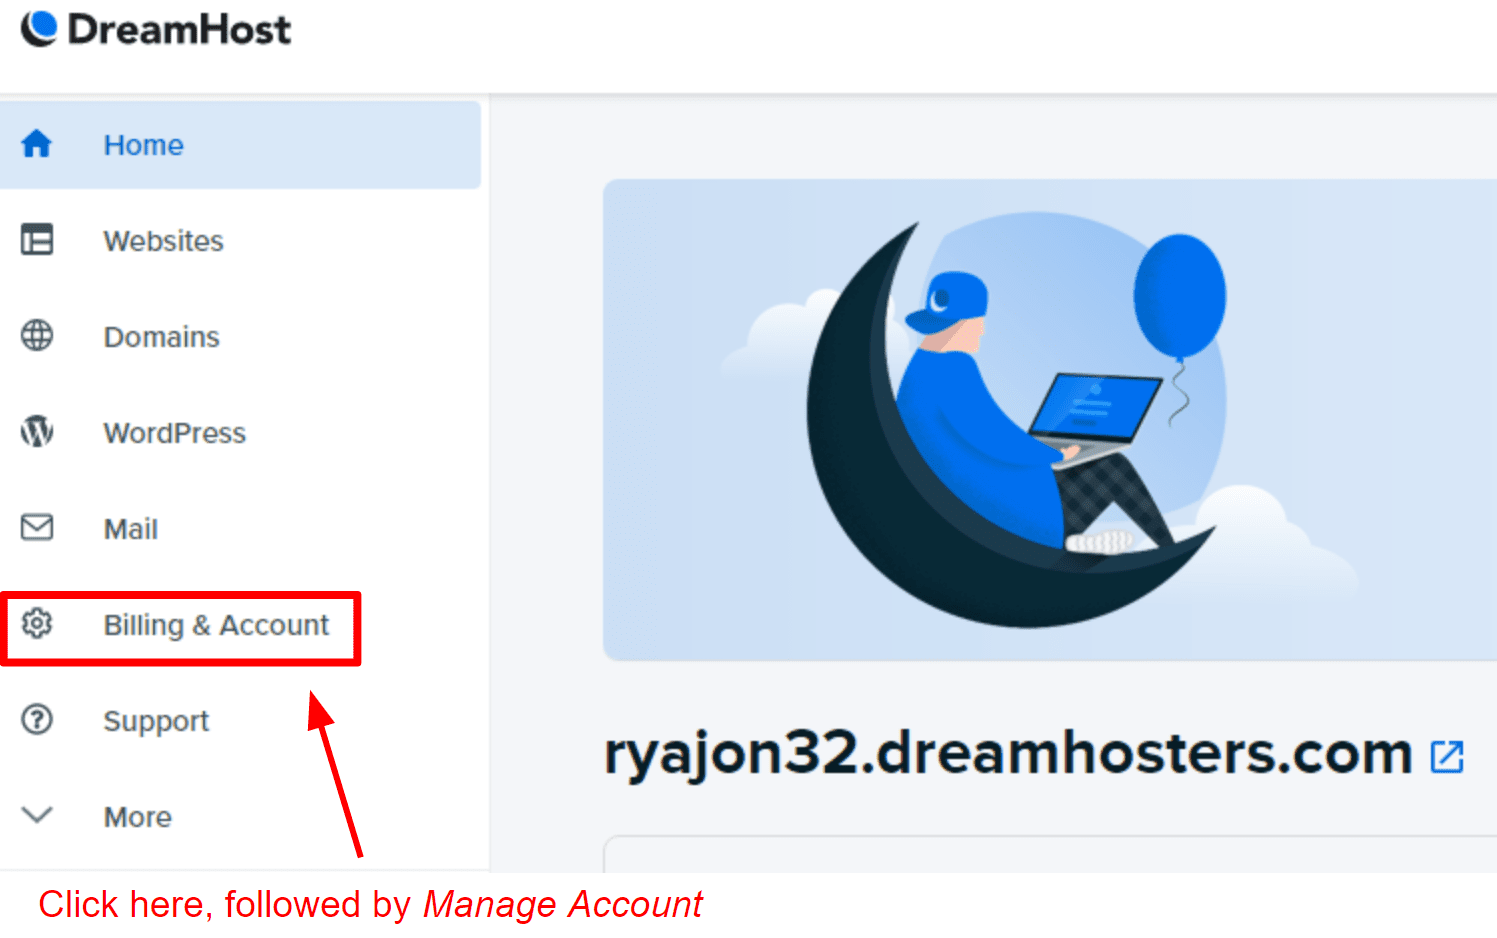 DreamHost control panel home page